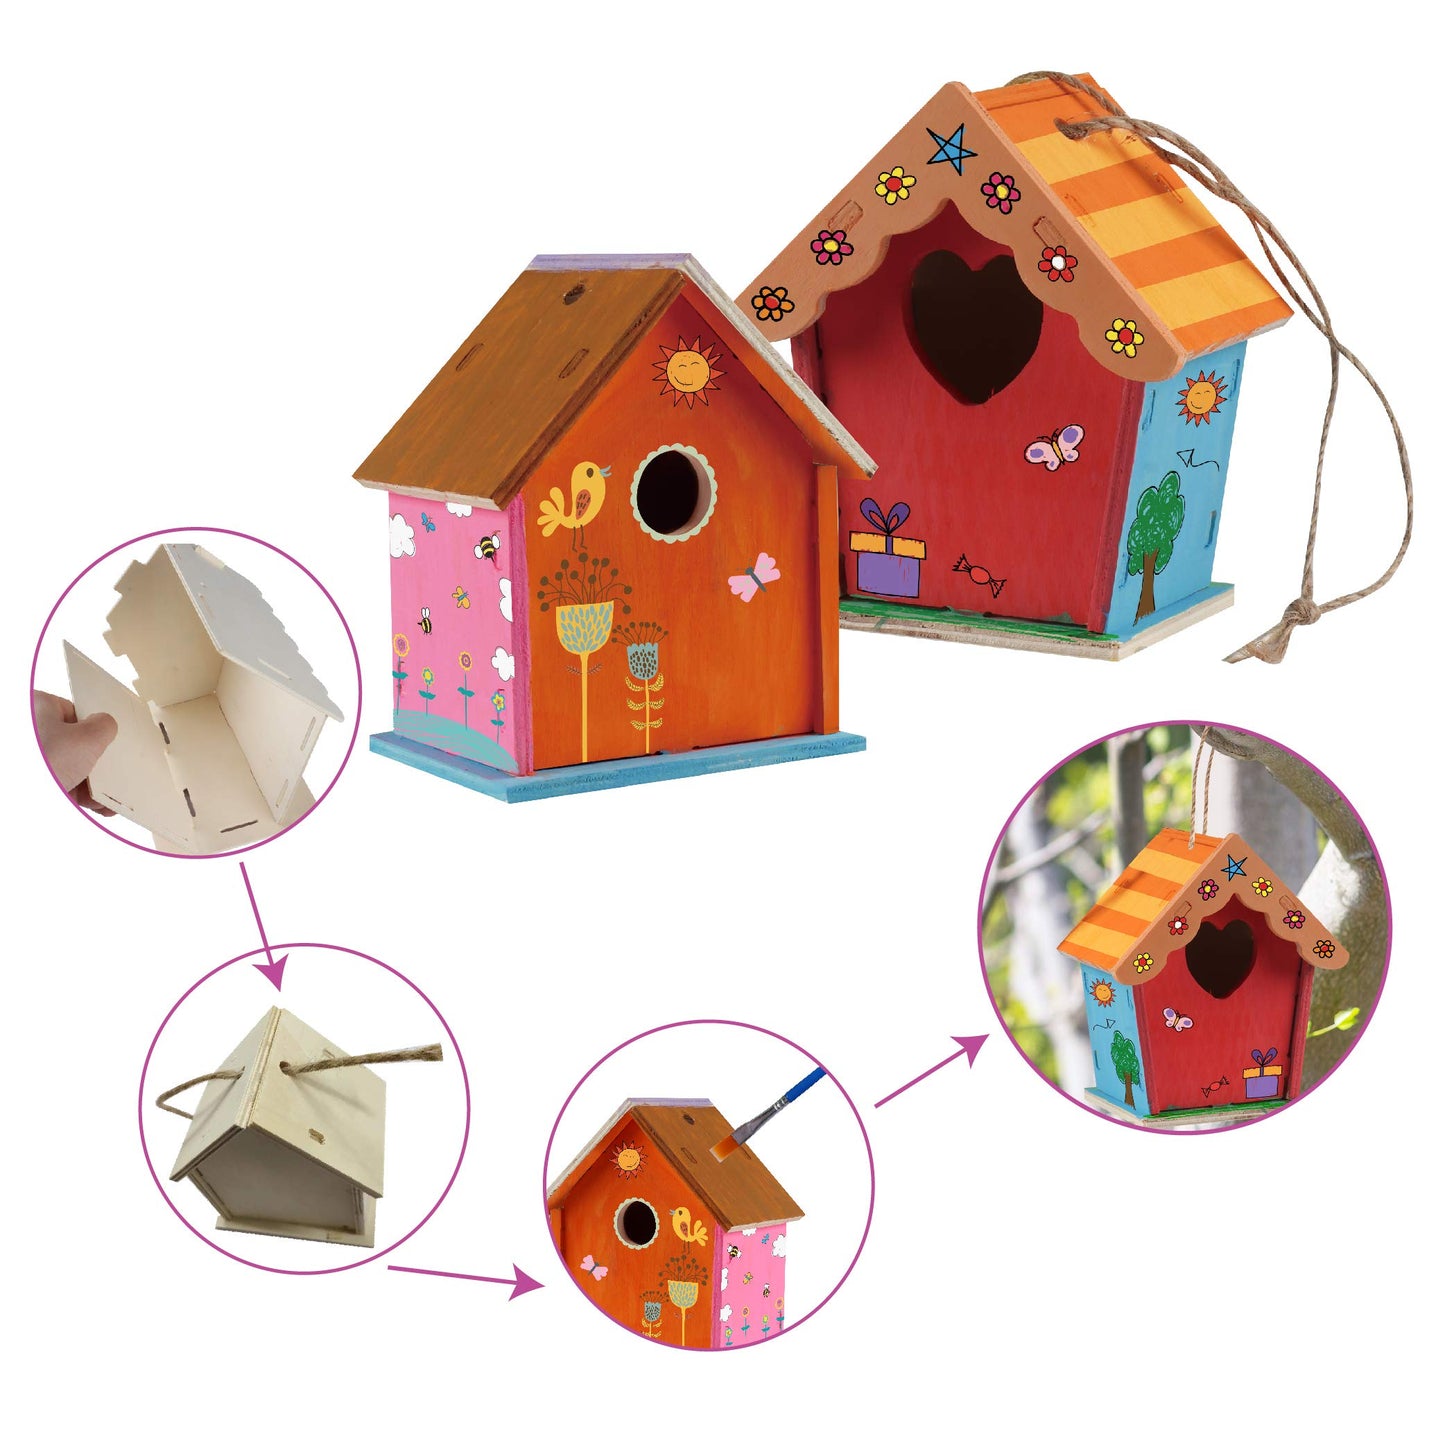 DIY Bird House Kit for Kids, Build Your Own Bird House Kit for Children, Includes 3 Unfinished Birdhouses to Paint and Build, Ropes, 12 Paints,